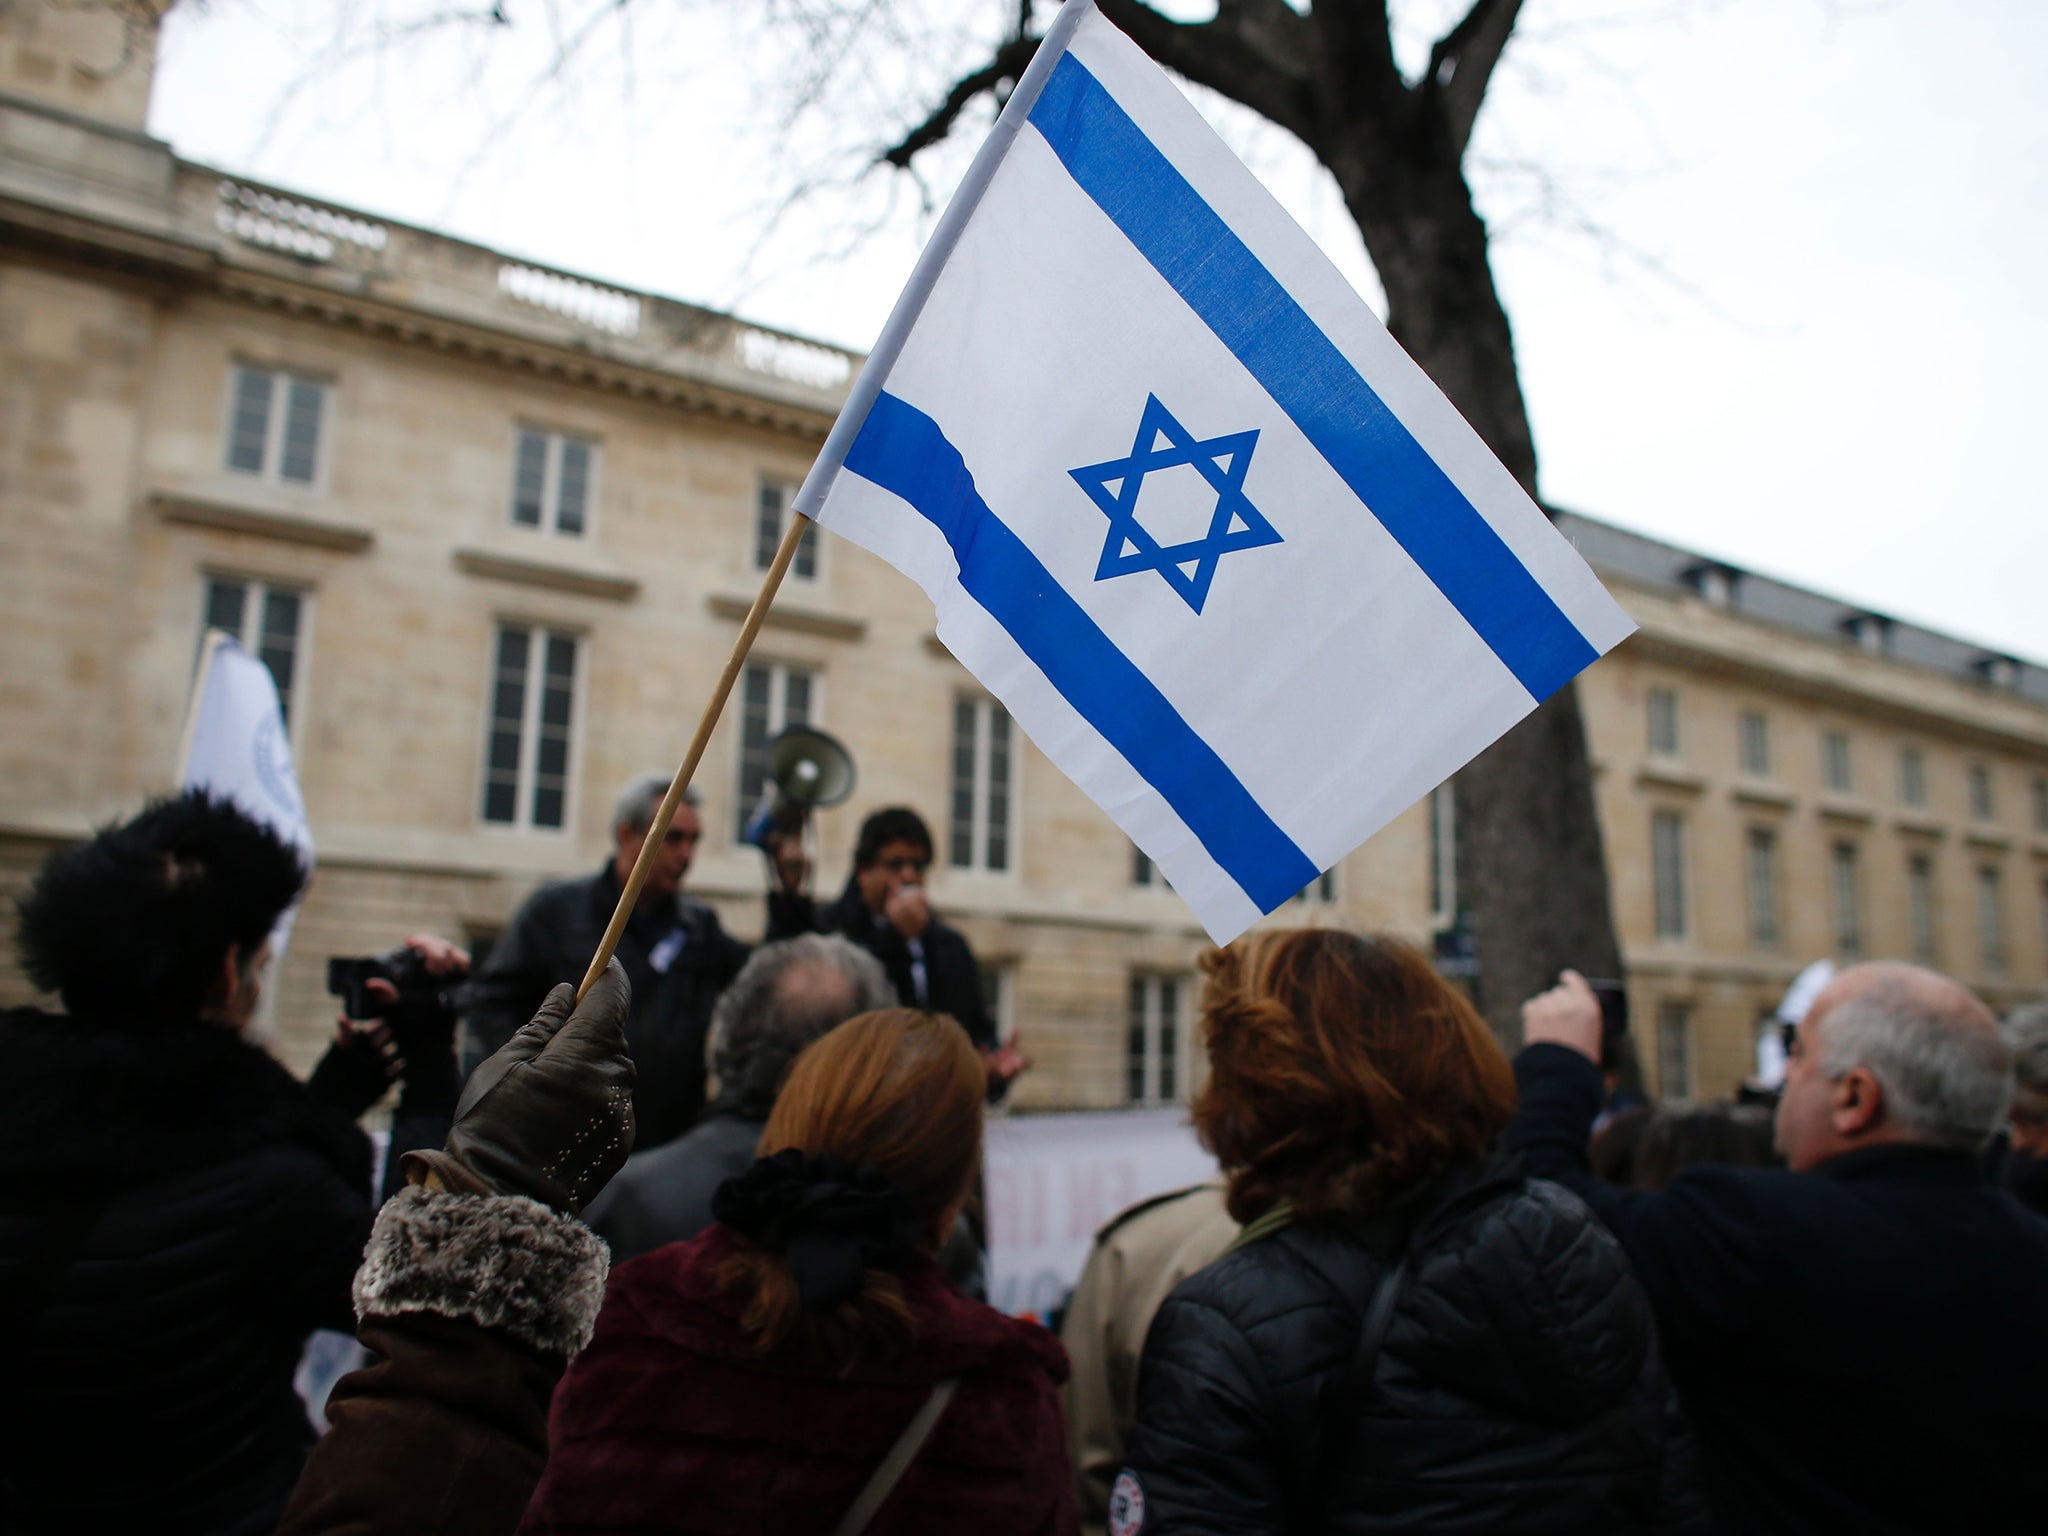 Approximately 8,000 French Jews migrated to Israel last year